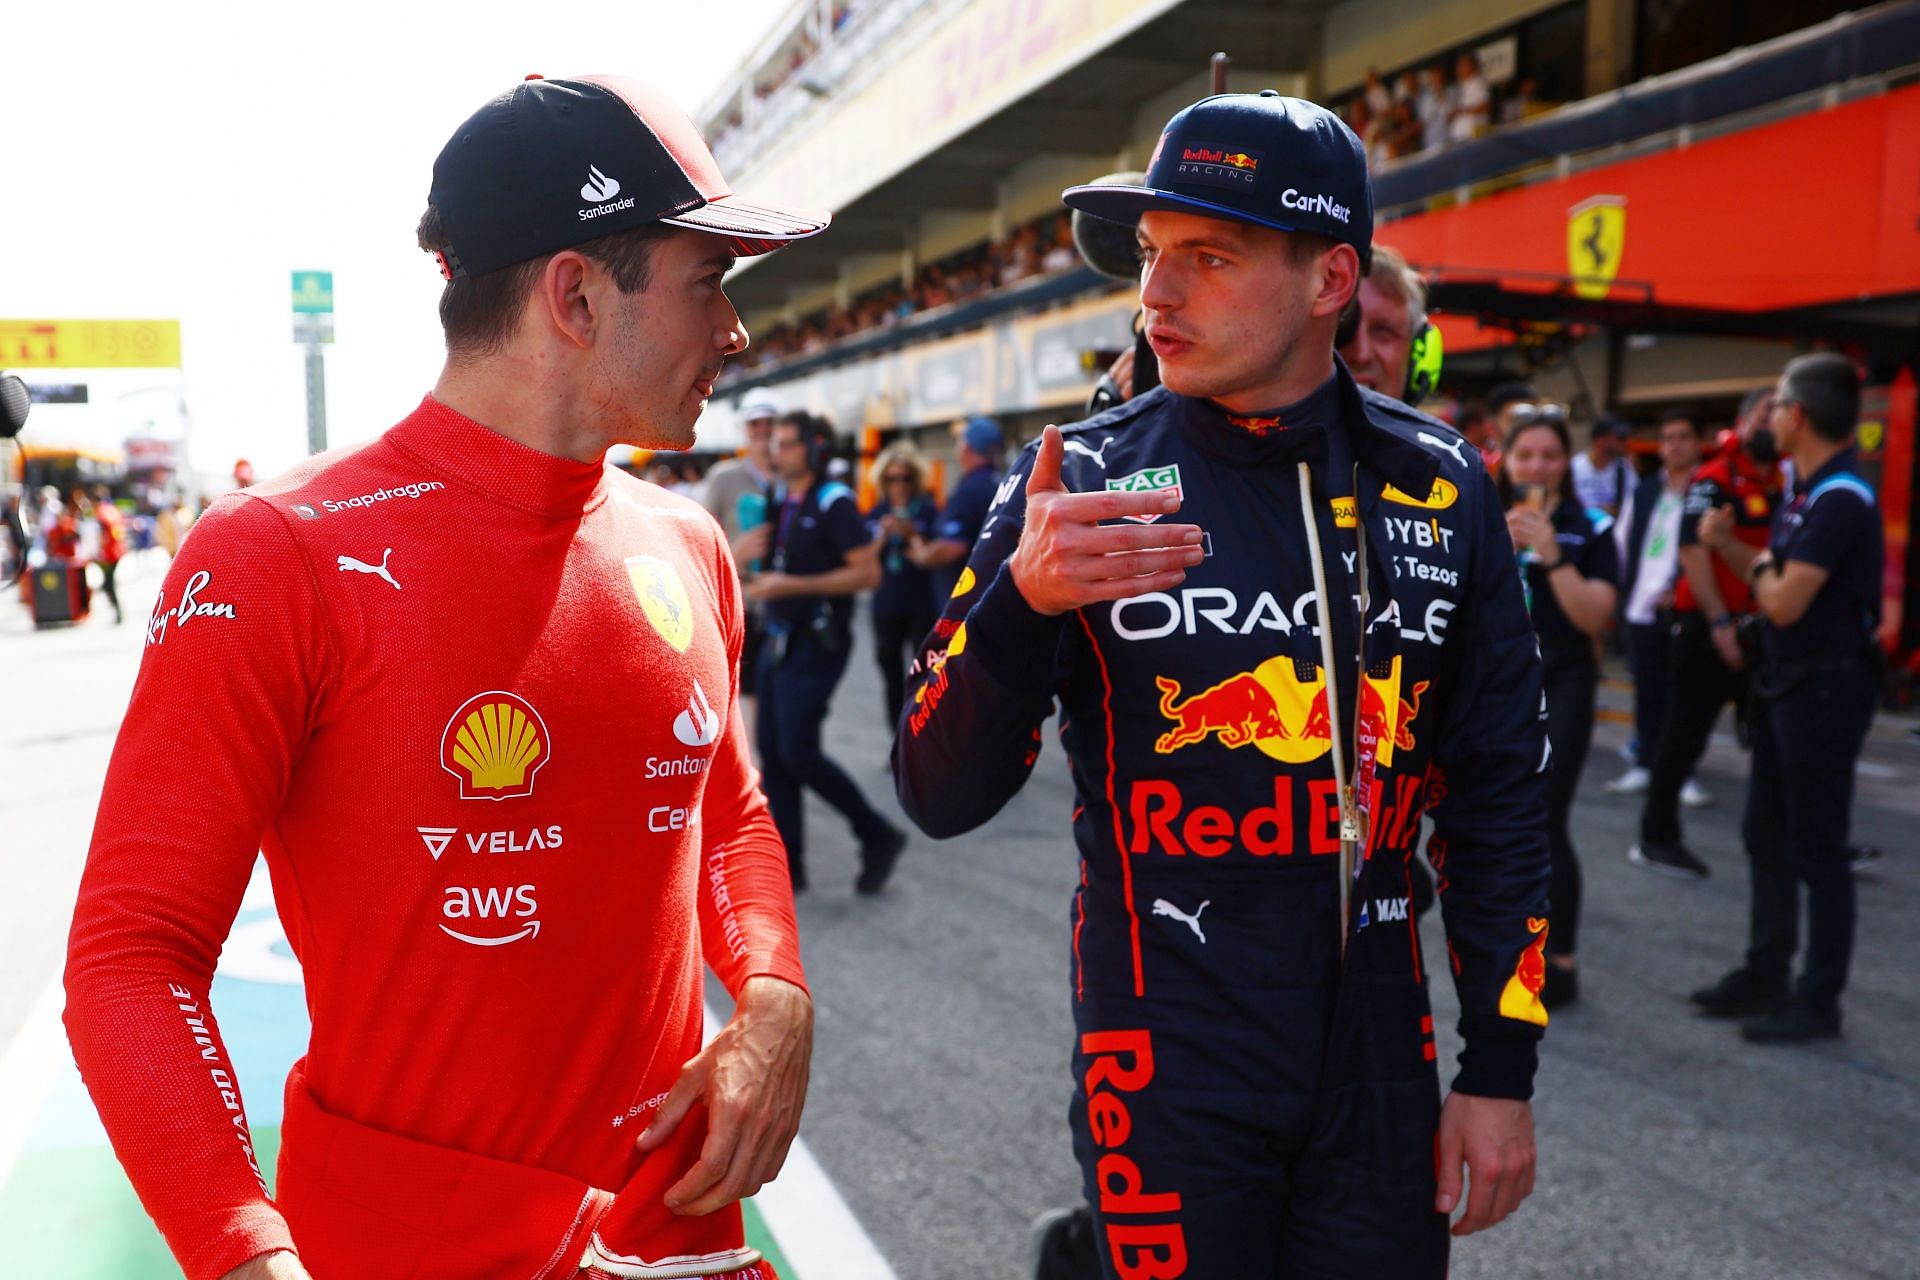 Both Charles Leclerc and Max Verstappen performed a rather stupendous job all weekend